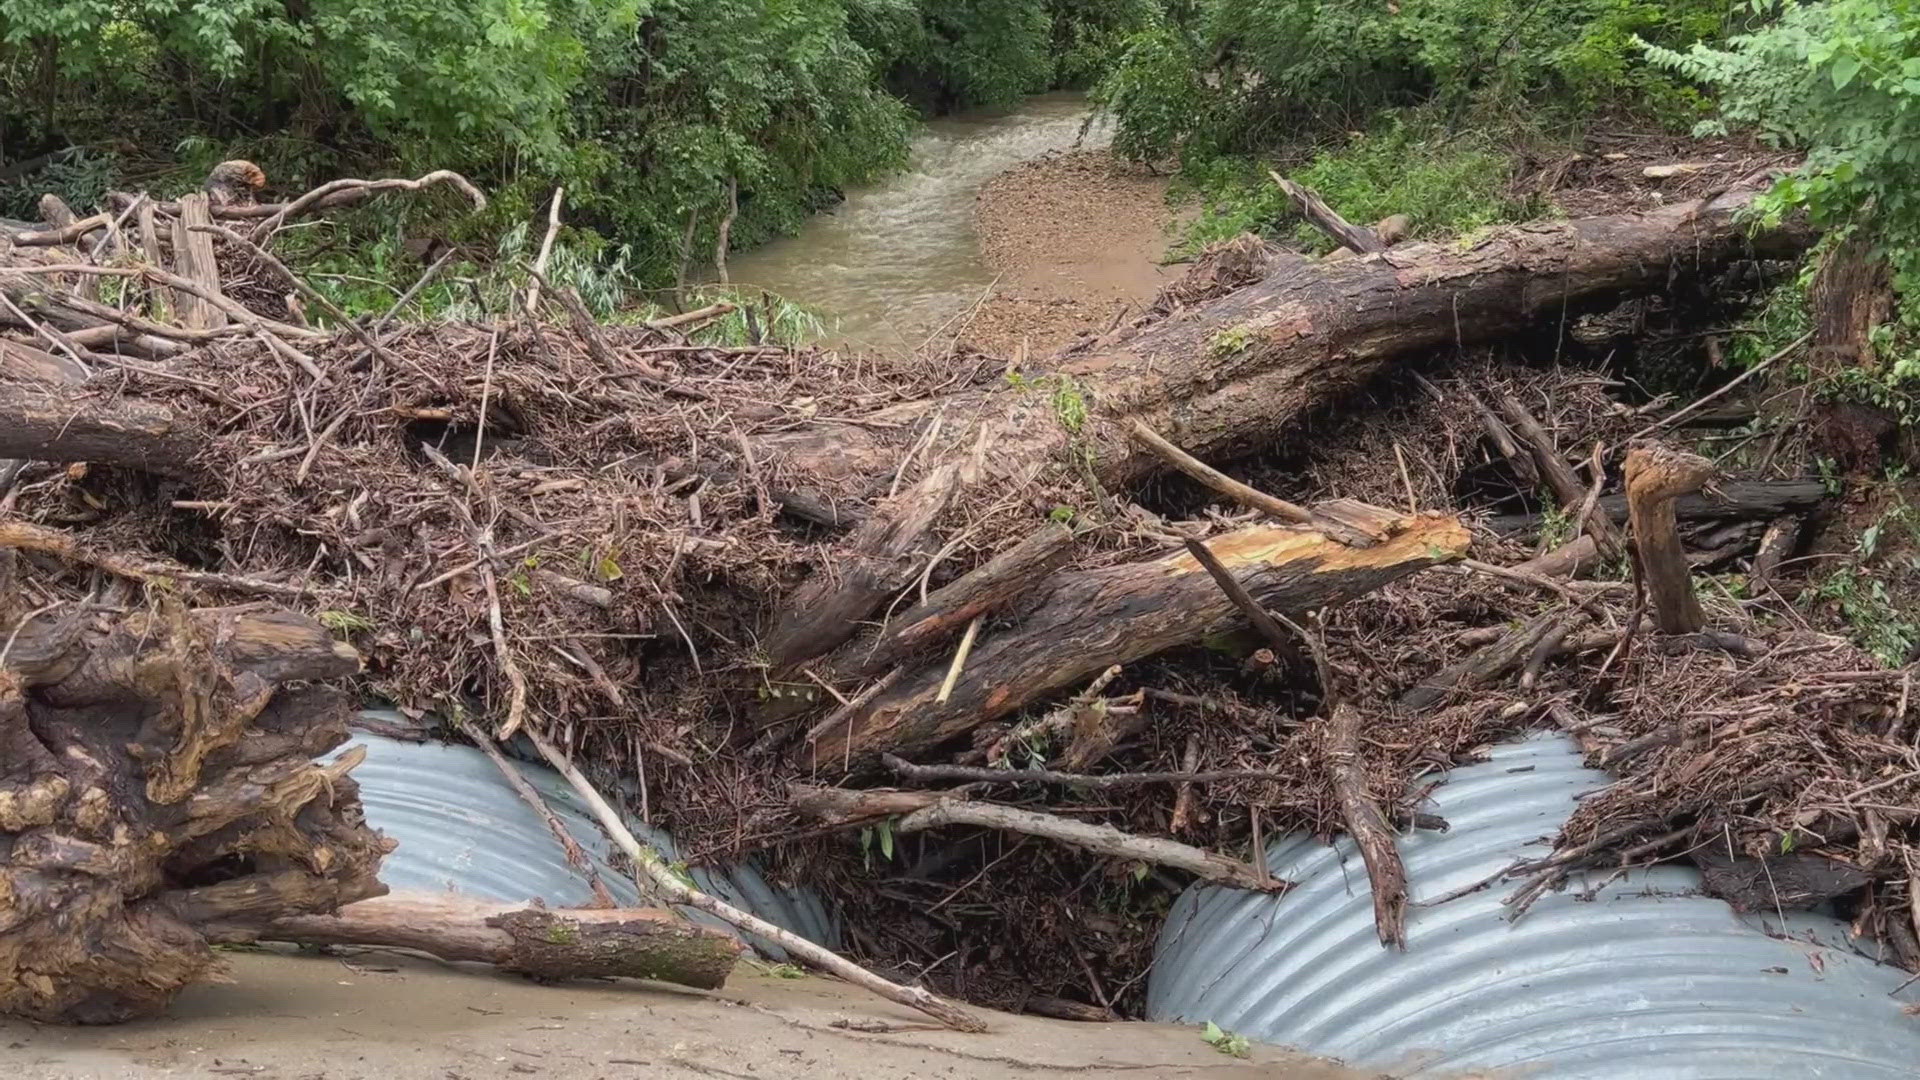 Early Thursday morning, water rose rapidly along an offshoot of Wild Horse Creek, leaving subdivision residents tasked with storm clean up on the Fourth of July.